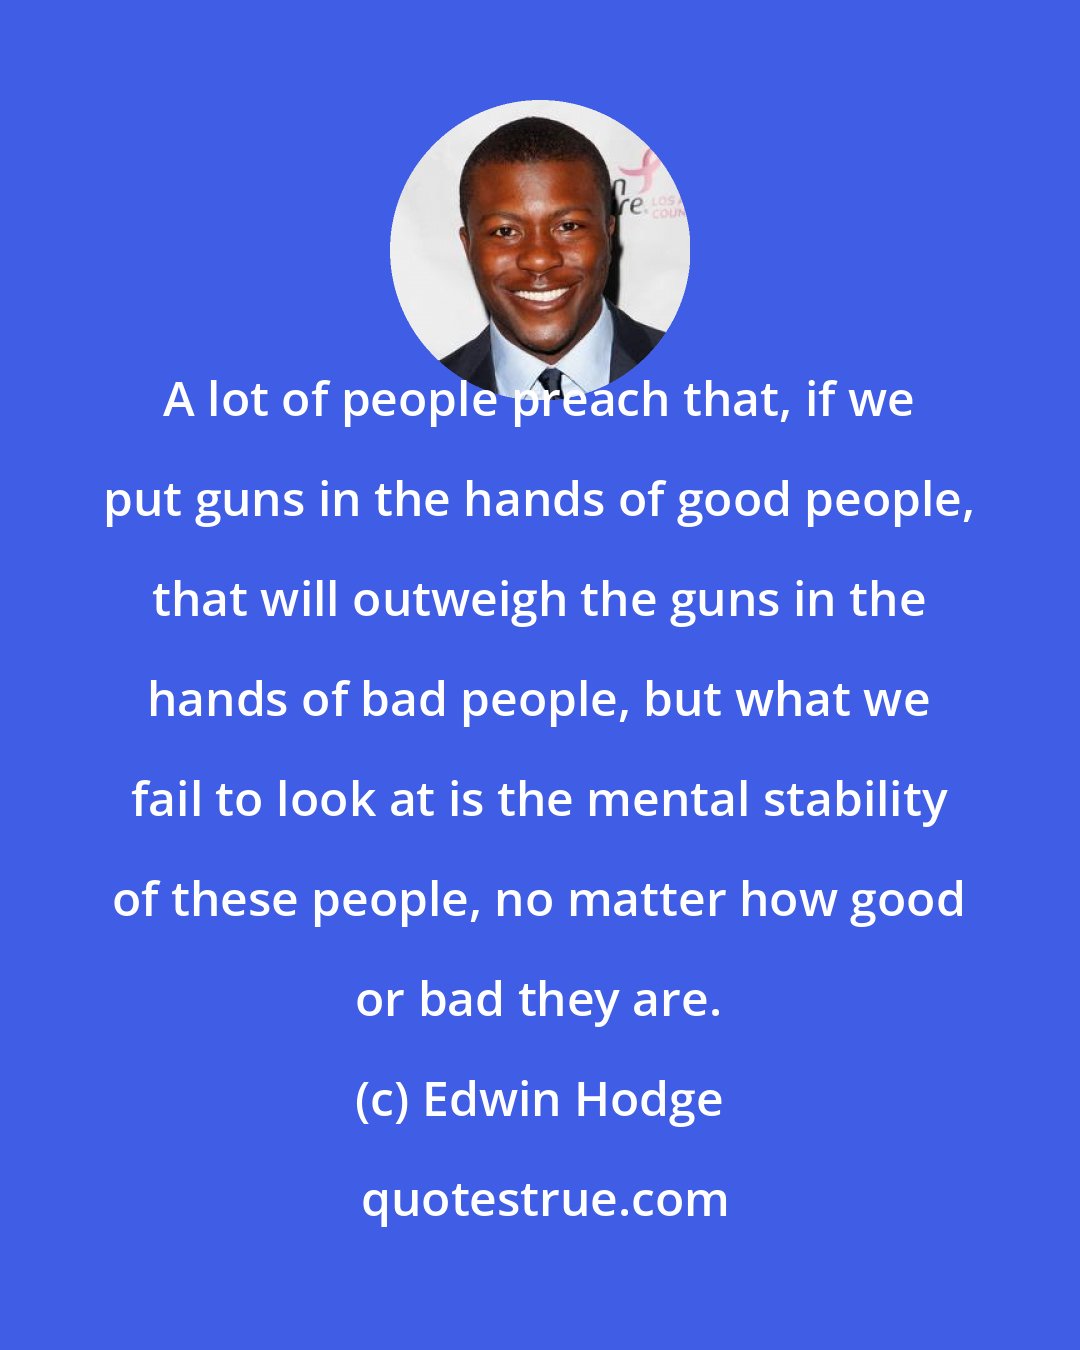 Edwin Hodge: A lot of people preach that, if we put guns in the hands of good people, that will outweigh the guns in the hands of bad people, but what we fail to look at is the mental stability of these people, no matter how good or bad they are.